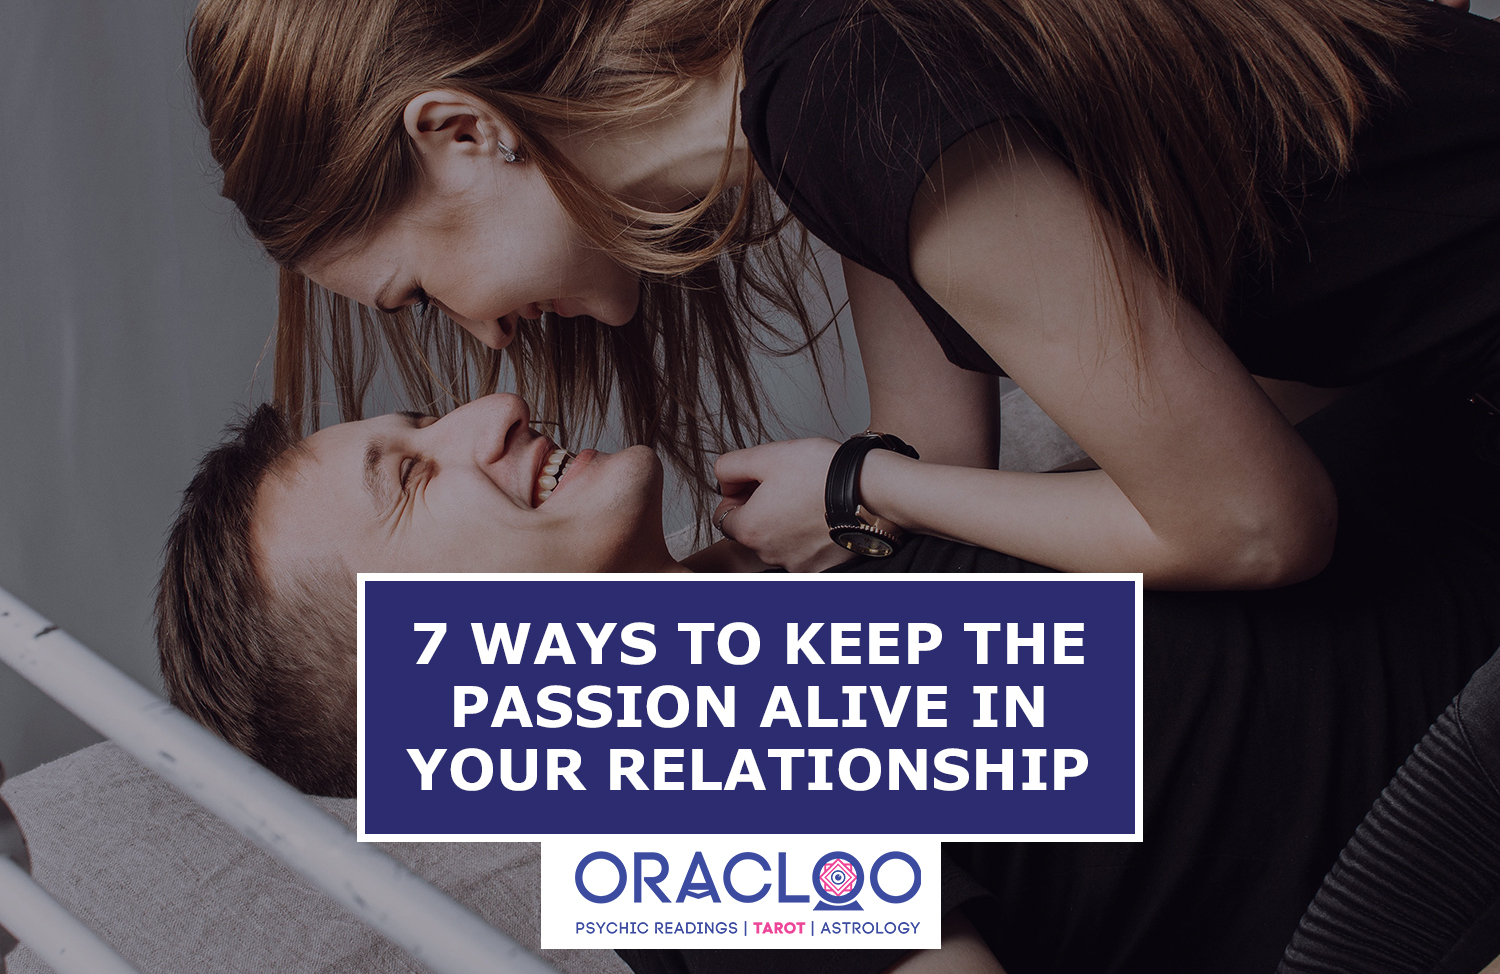 7 Ways to keep the passion alive in your relationship